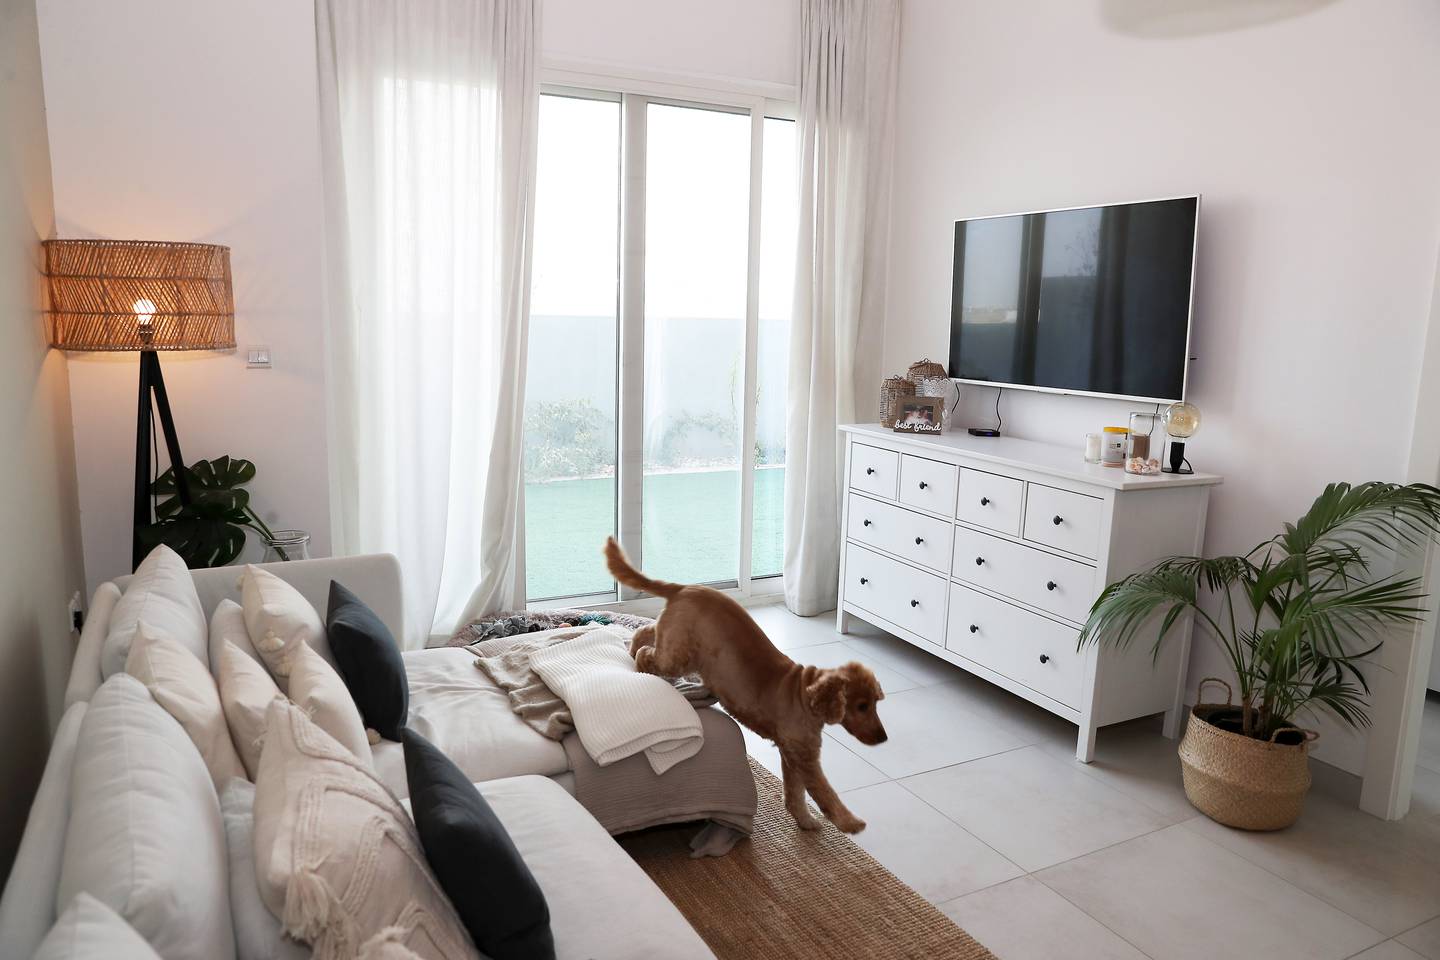 View of the living room and Alexia's dog, Oscar. Photo: Pawan Singh / The National